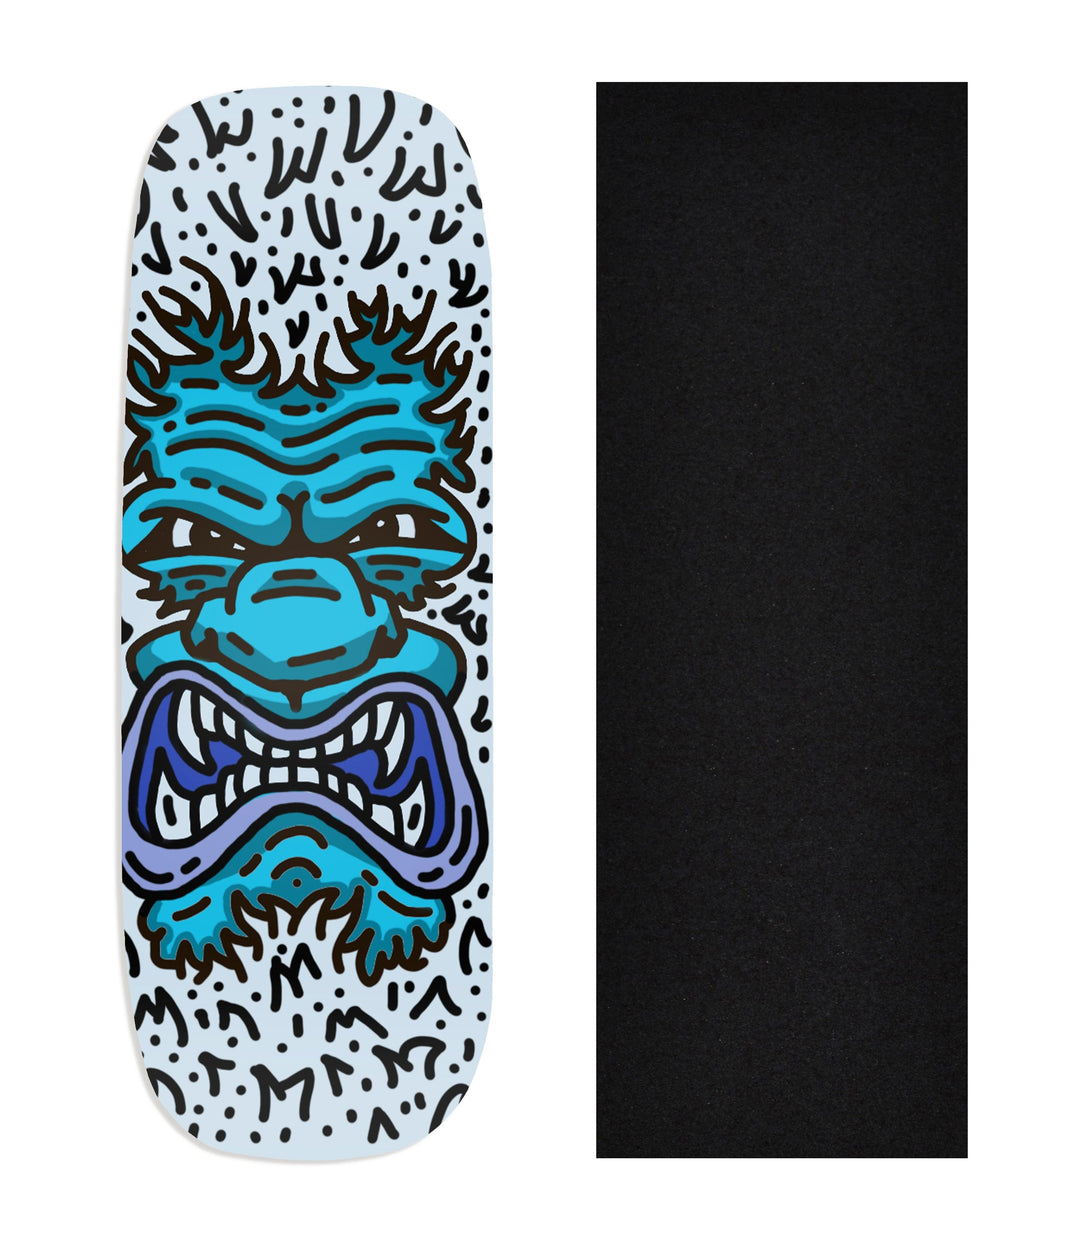 Teak Tuning Heat Transfer Graphic Wooden Fingerboard Deck, @sausage.ramps - Entry#96 Boxy Deck